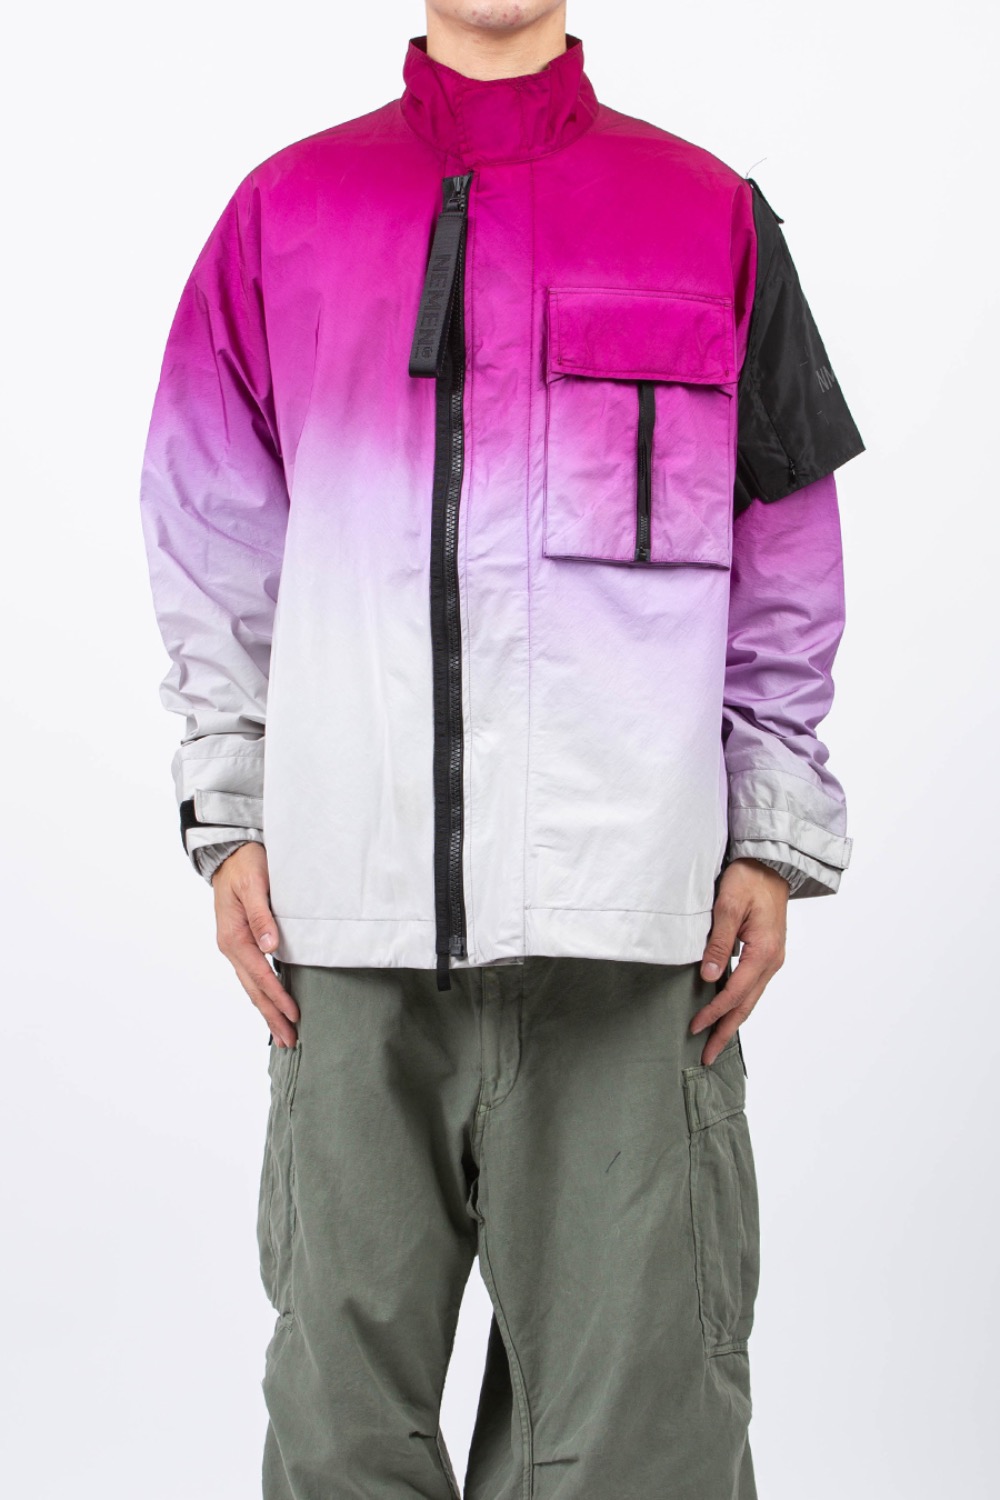 WOVEN ZEPHYR 3L JACKET DIPPING PURPLE